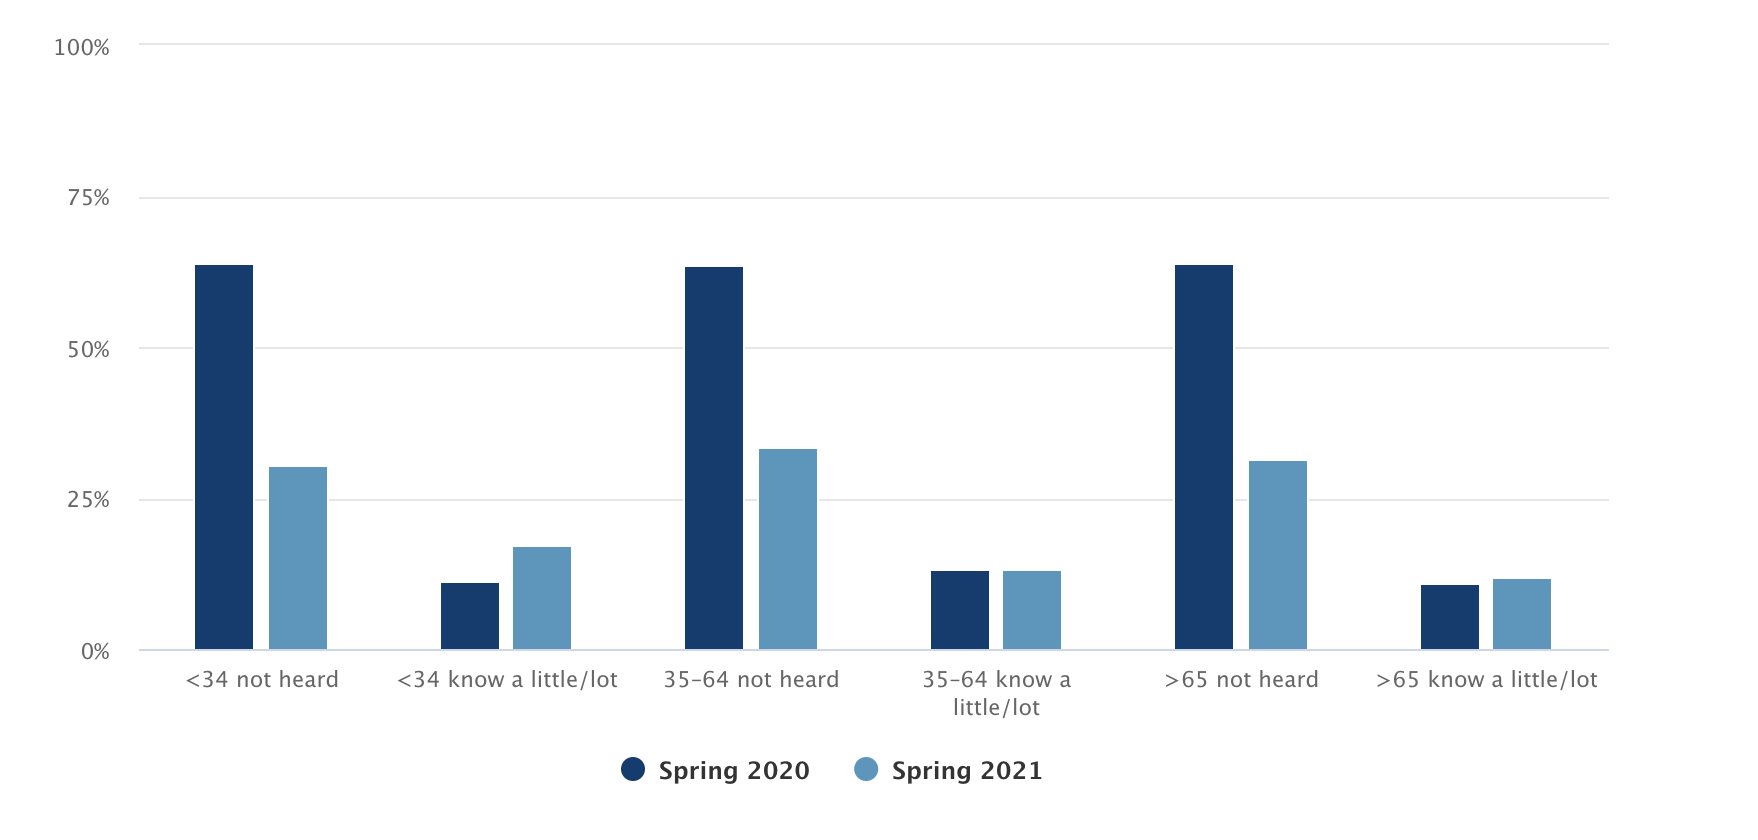 Net-zero knowledge in spring 2020 and spring 2021 according to age